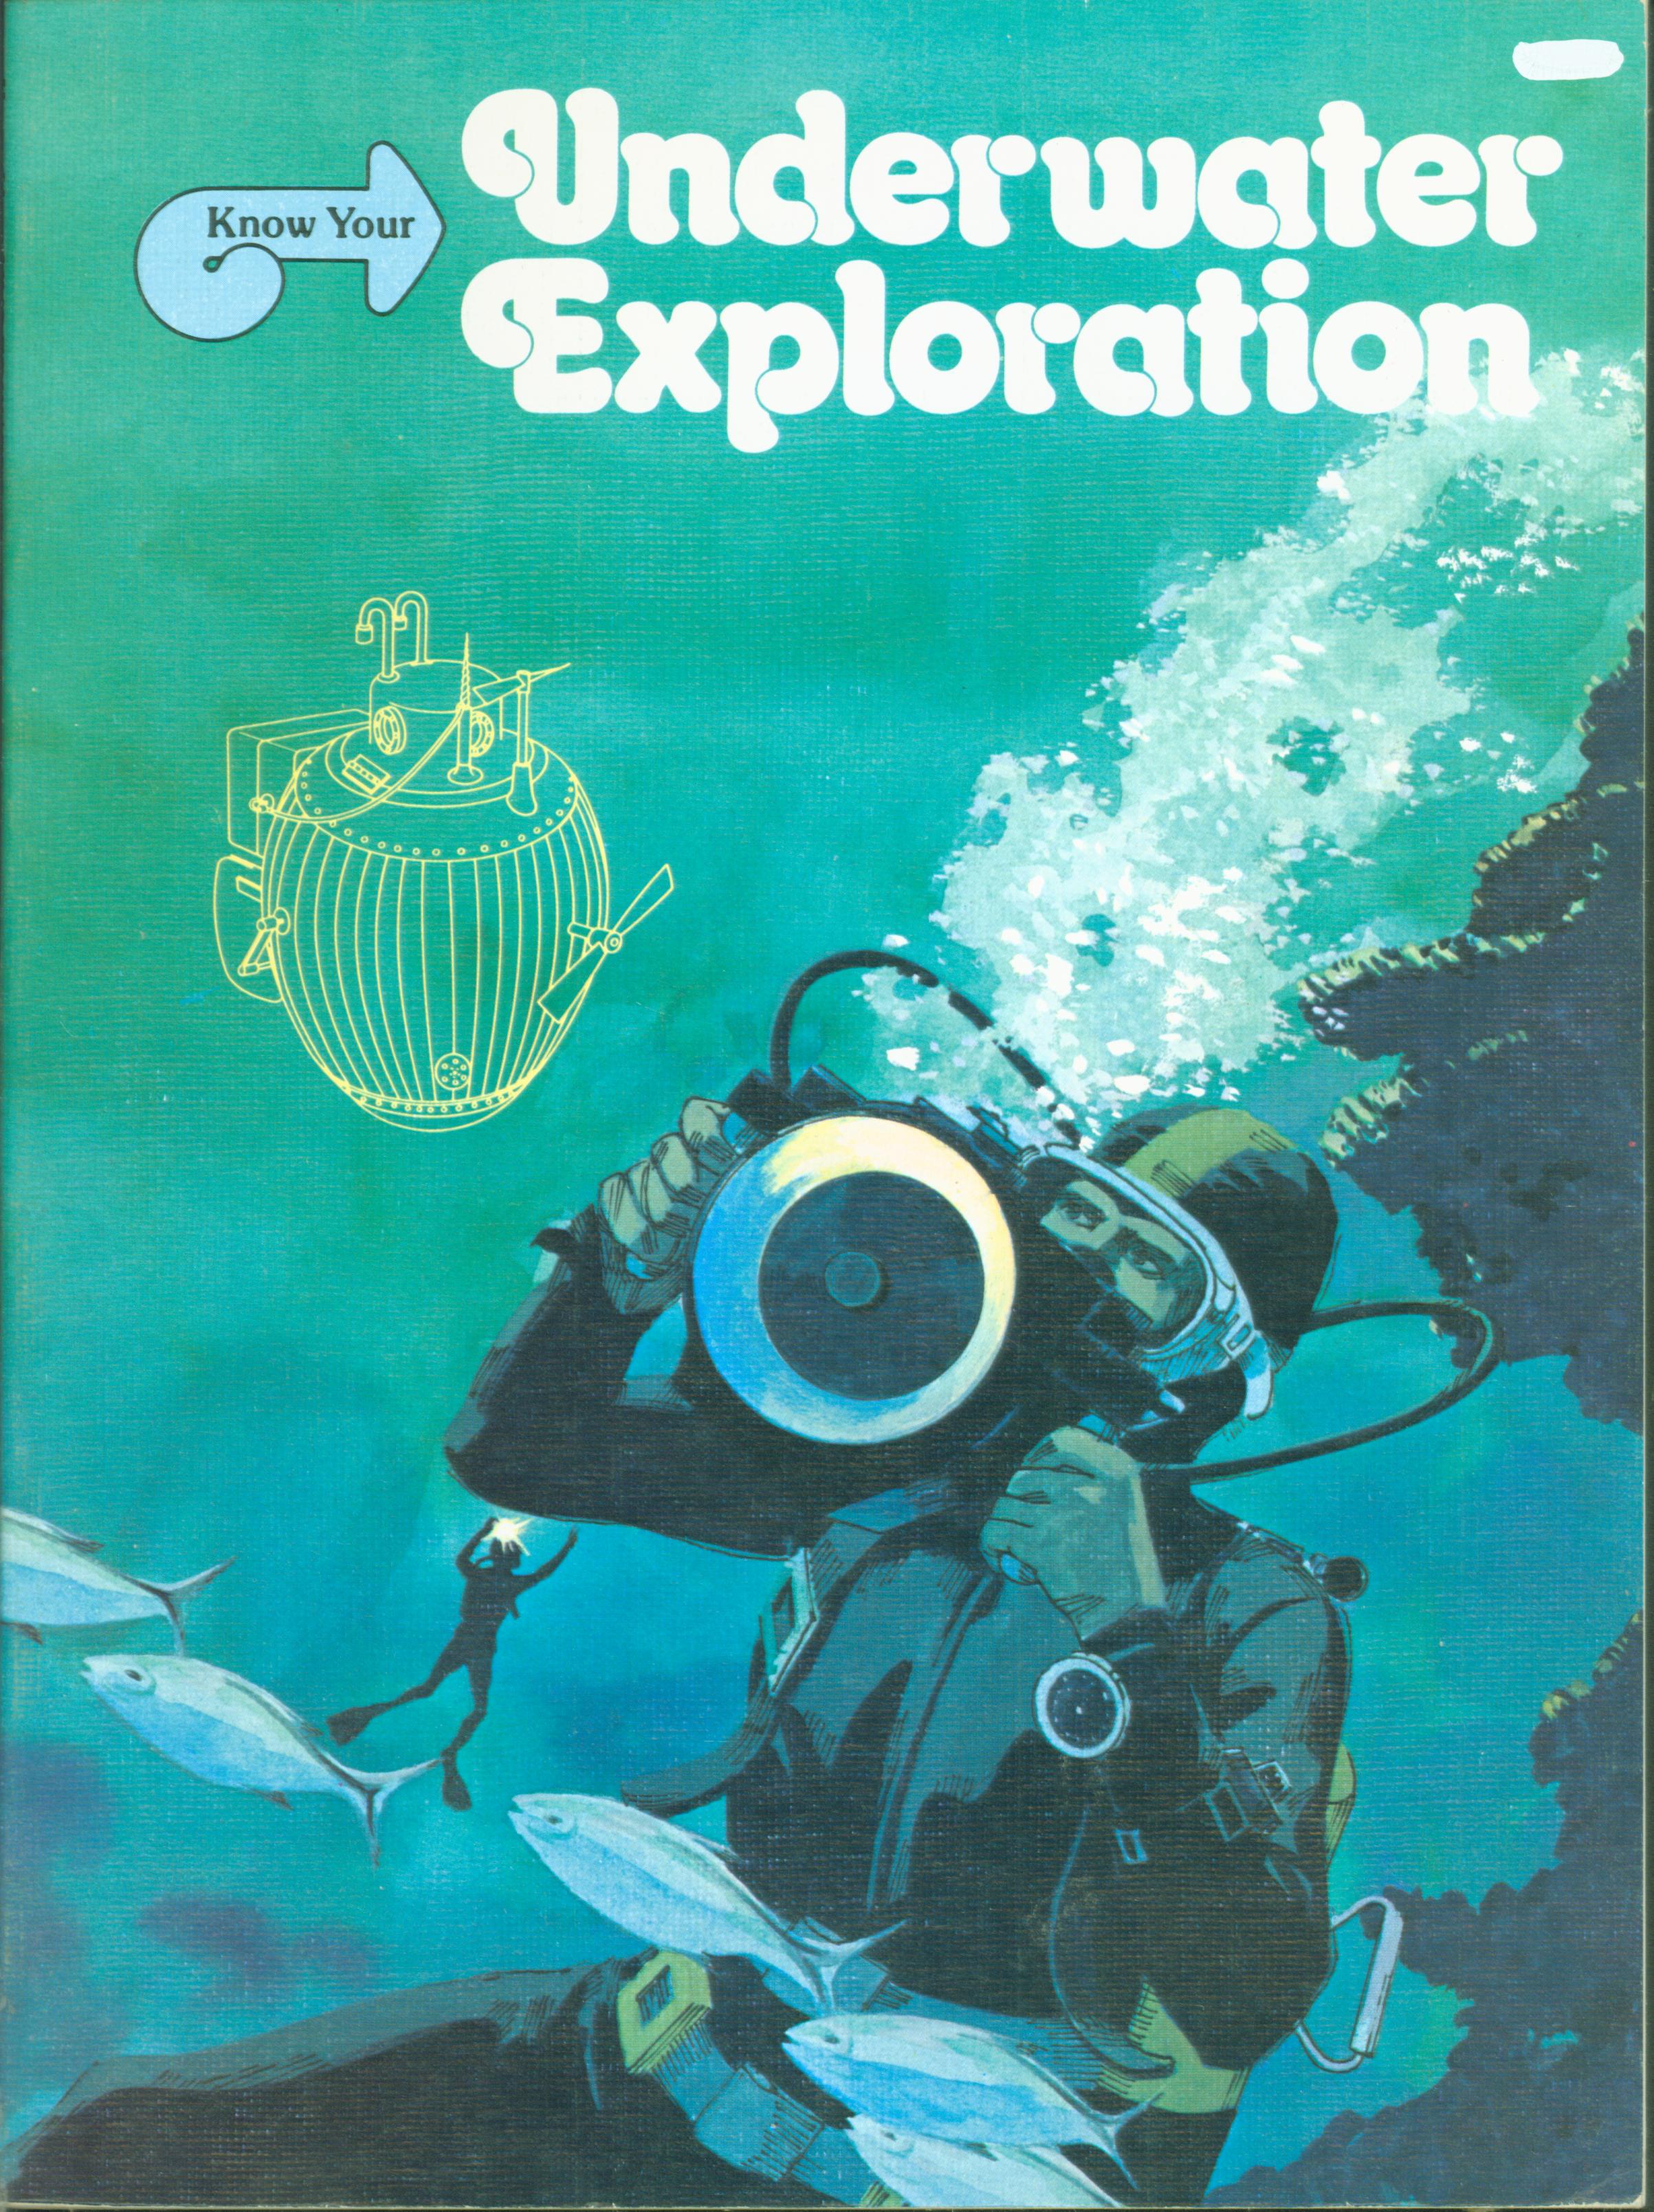 KNOW YOUR UNDERWATER EXPLORATION. 